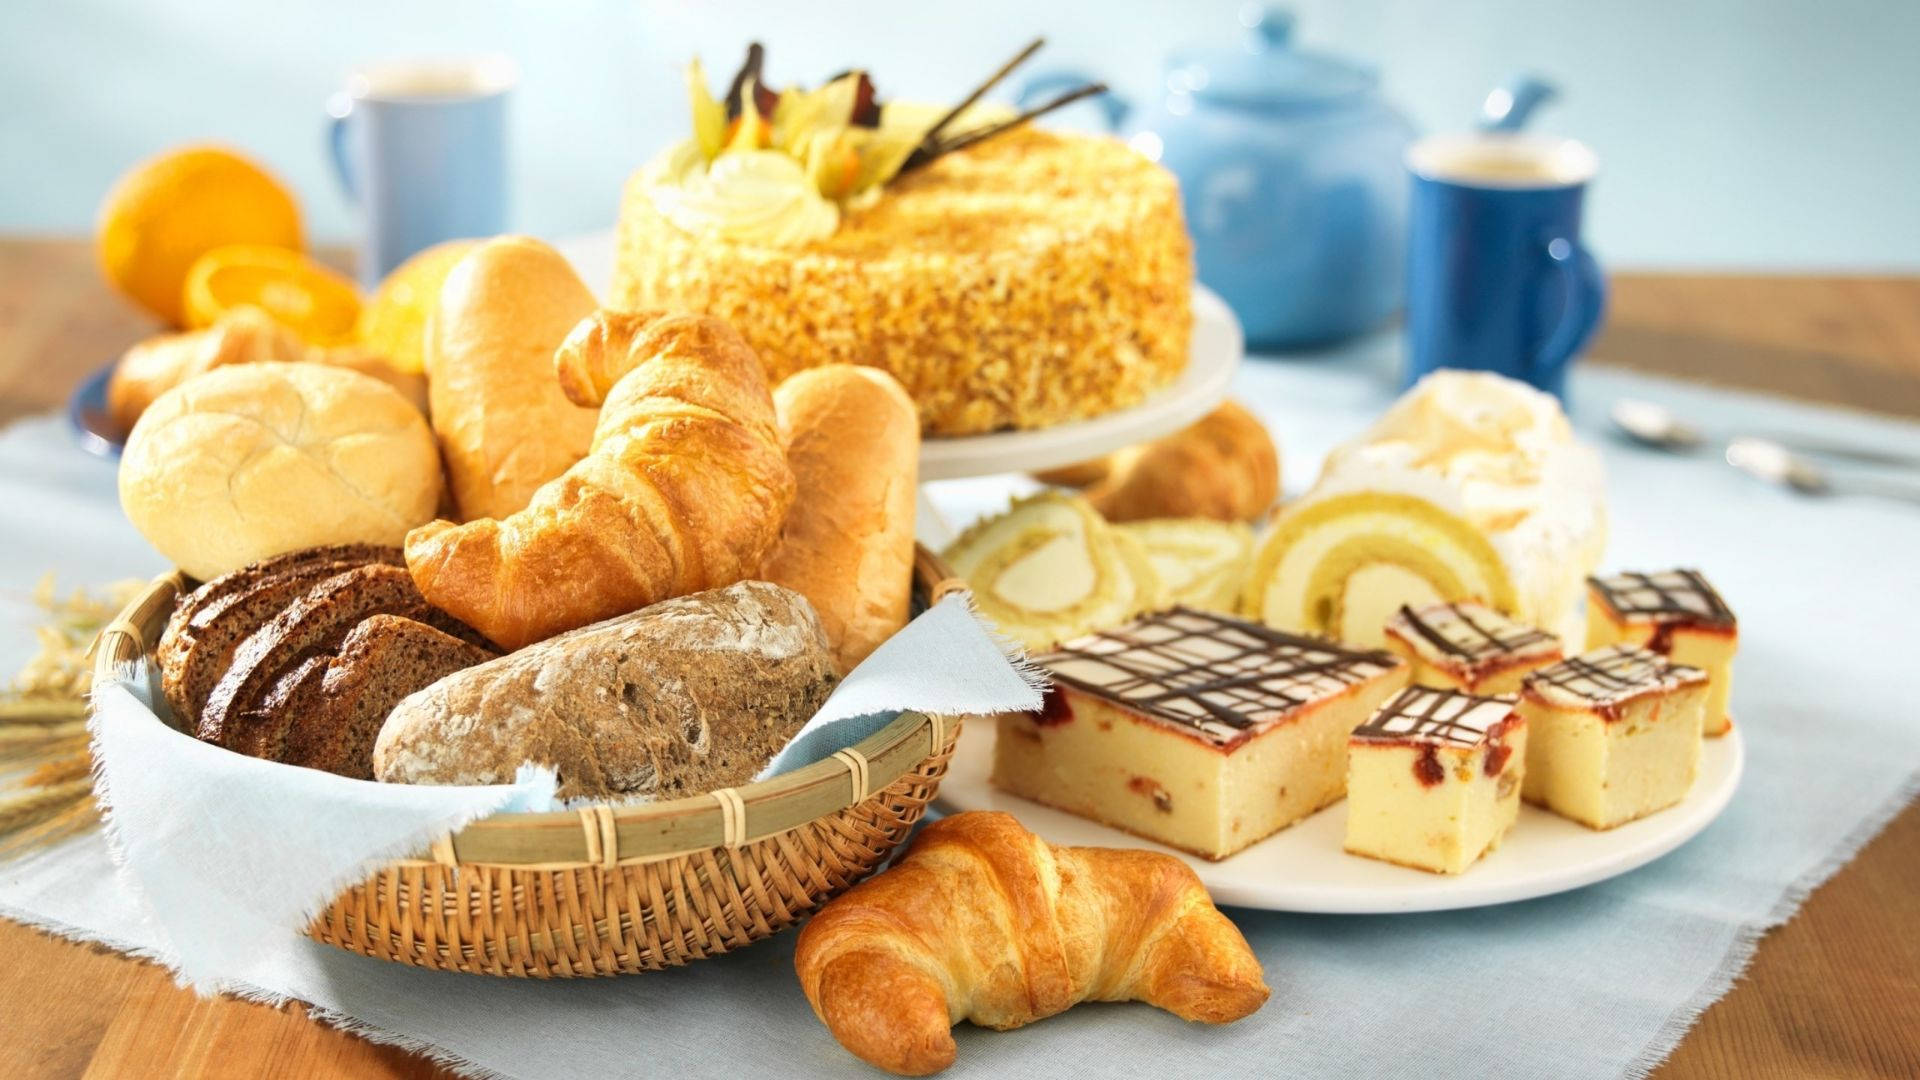 Breads With Desserts Wallpaper